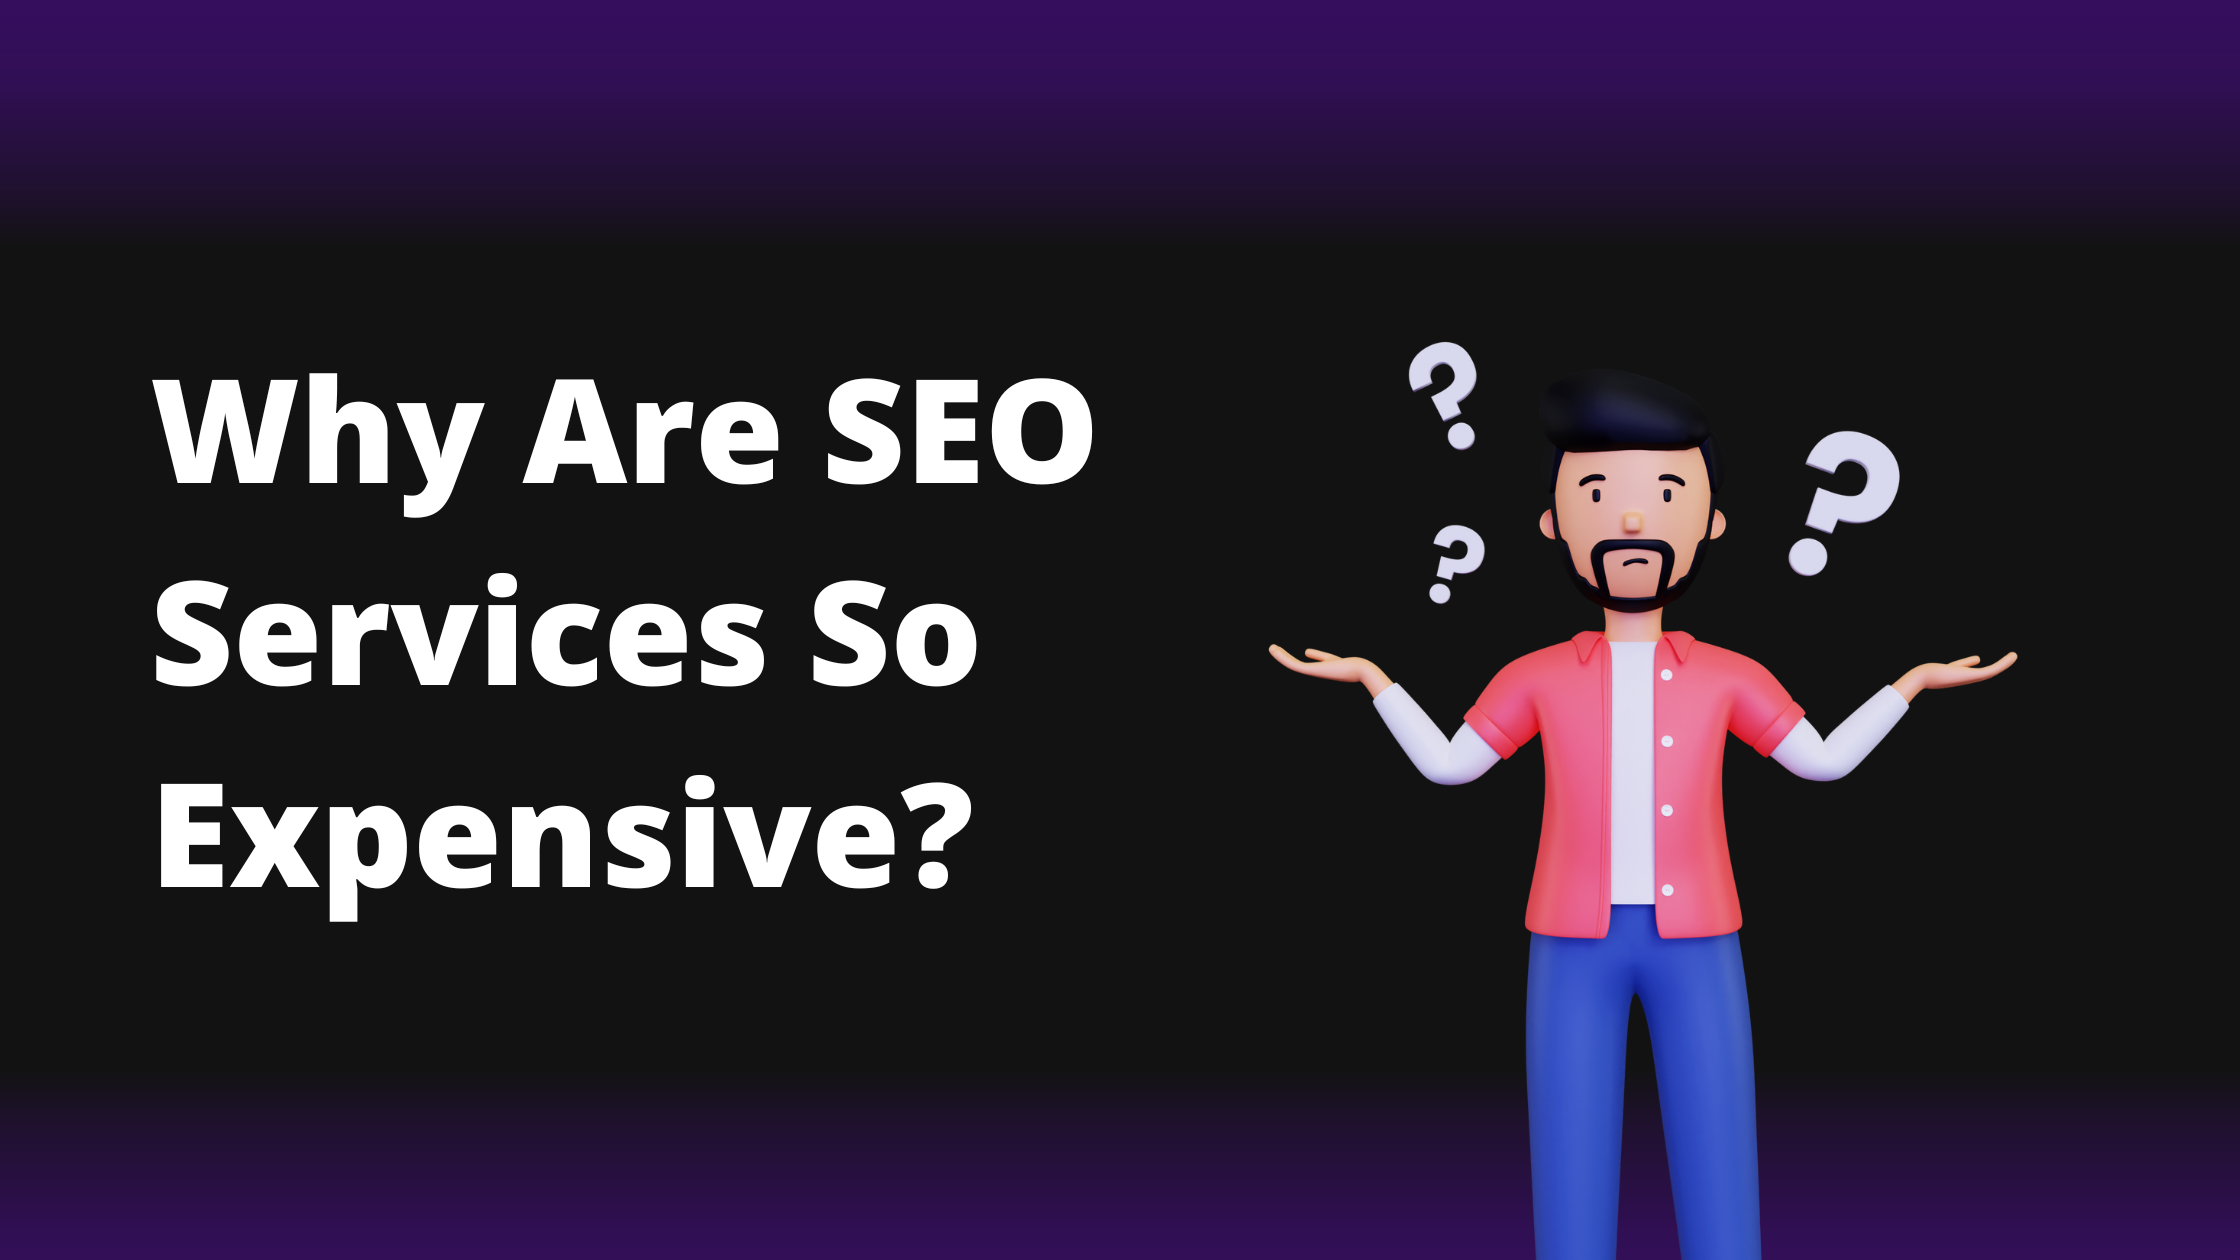 Why Are SEO Services So Expensive?